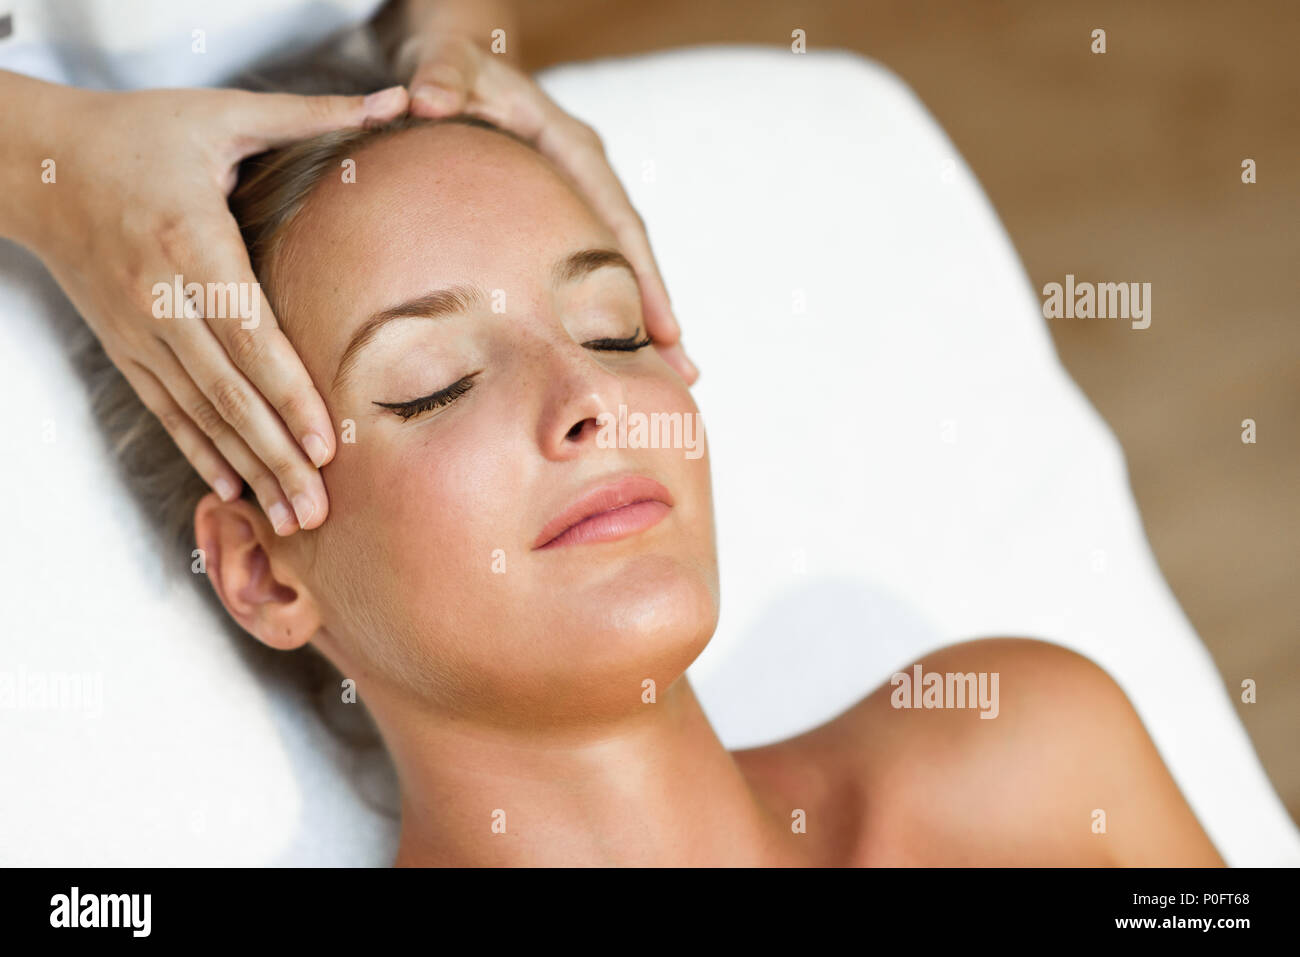 Young blond woman receiving a head massage in a spa center with eyes closed. Female patient is receiving treatment by professional therapist. Stock Photo